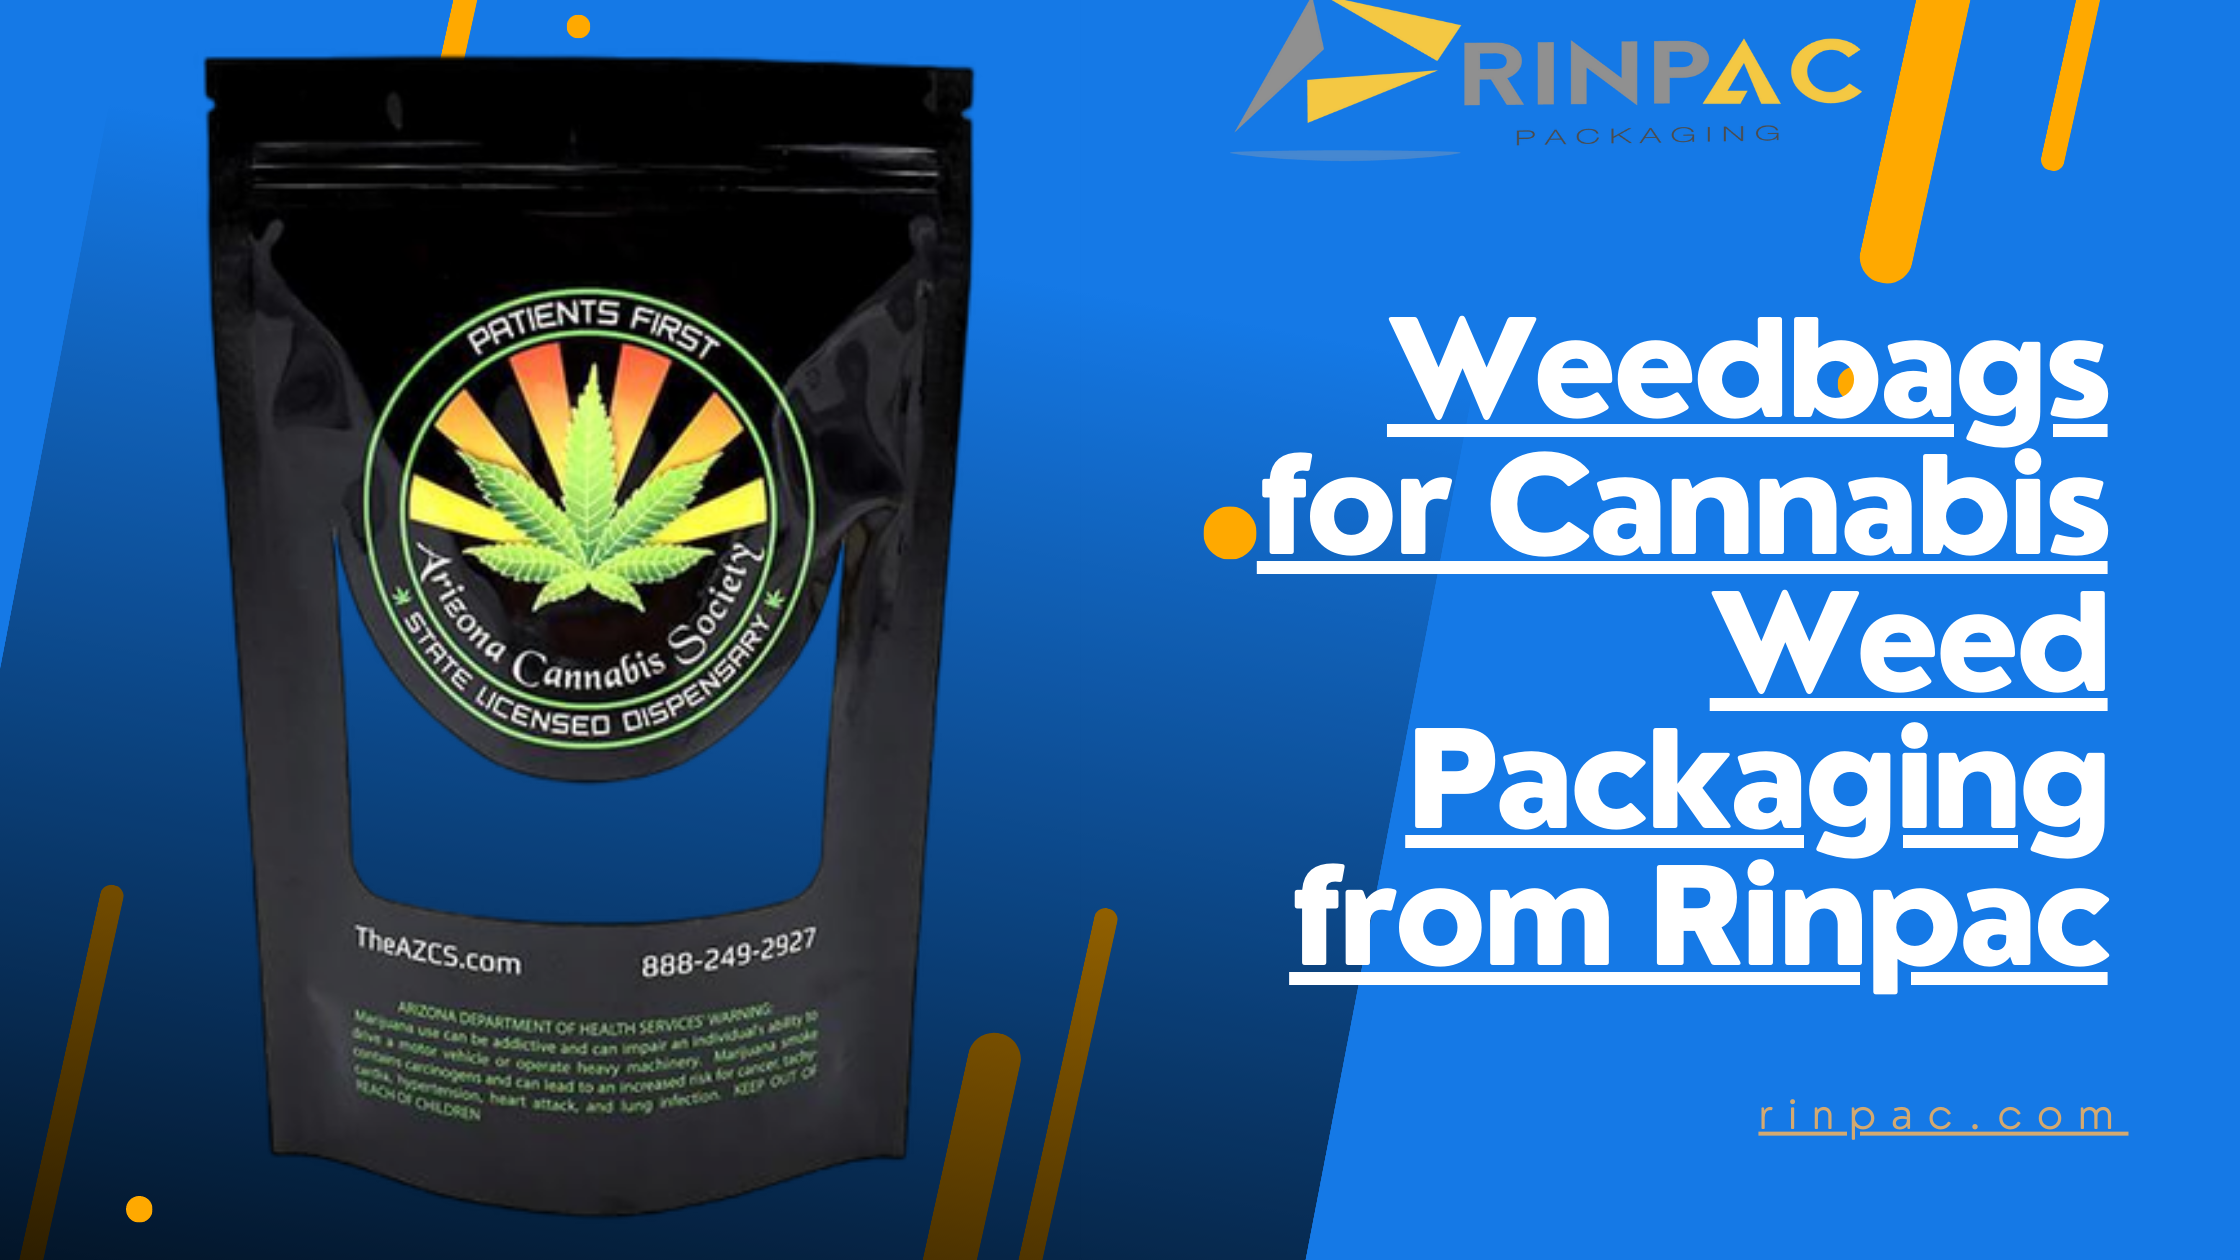 Weedbags for Cannabis Weed Packaging from Rinpac